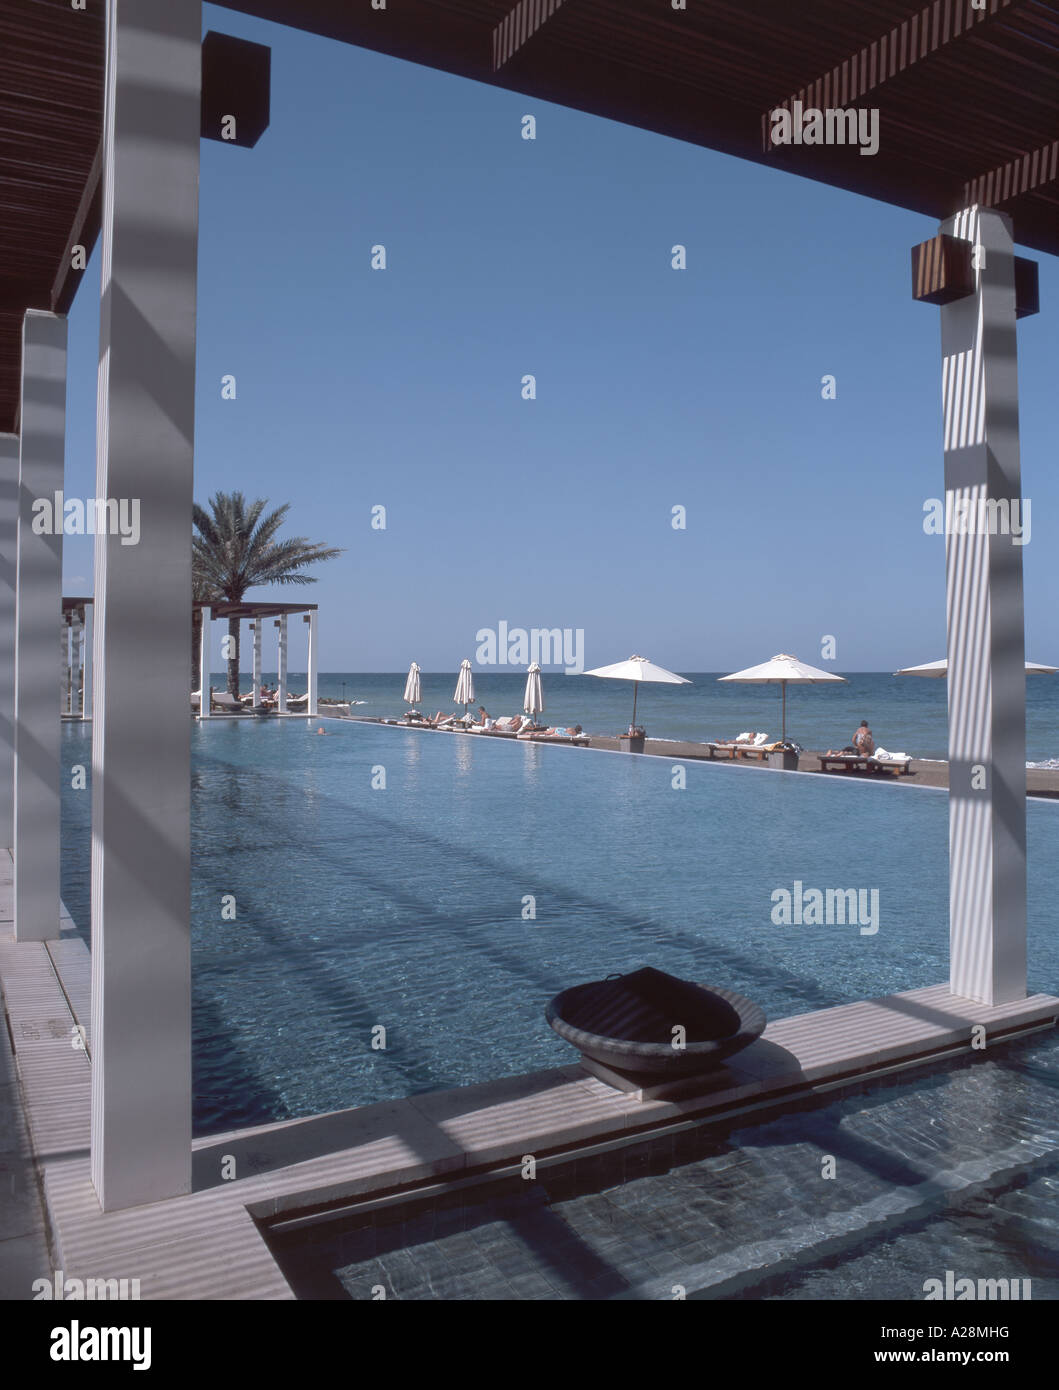 The Chedi Muscat Hotel Infinity Pool, Chedi, Muscat, Masqat Governorate, Sultanate of Oman Stock Photo